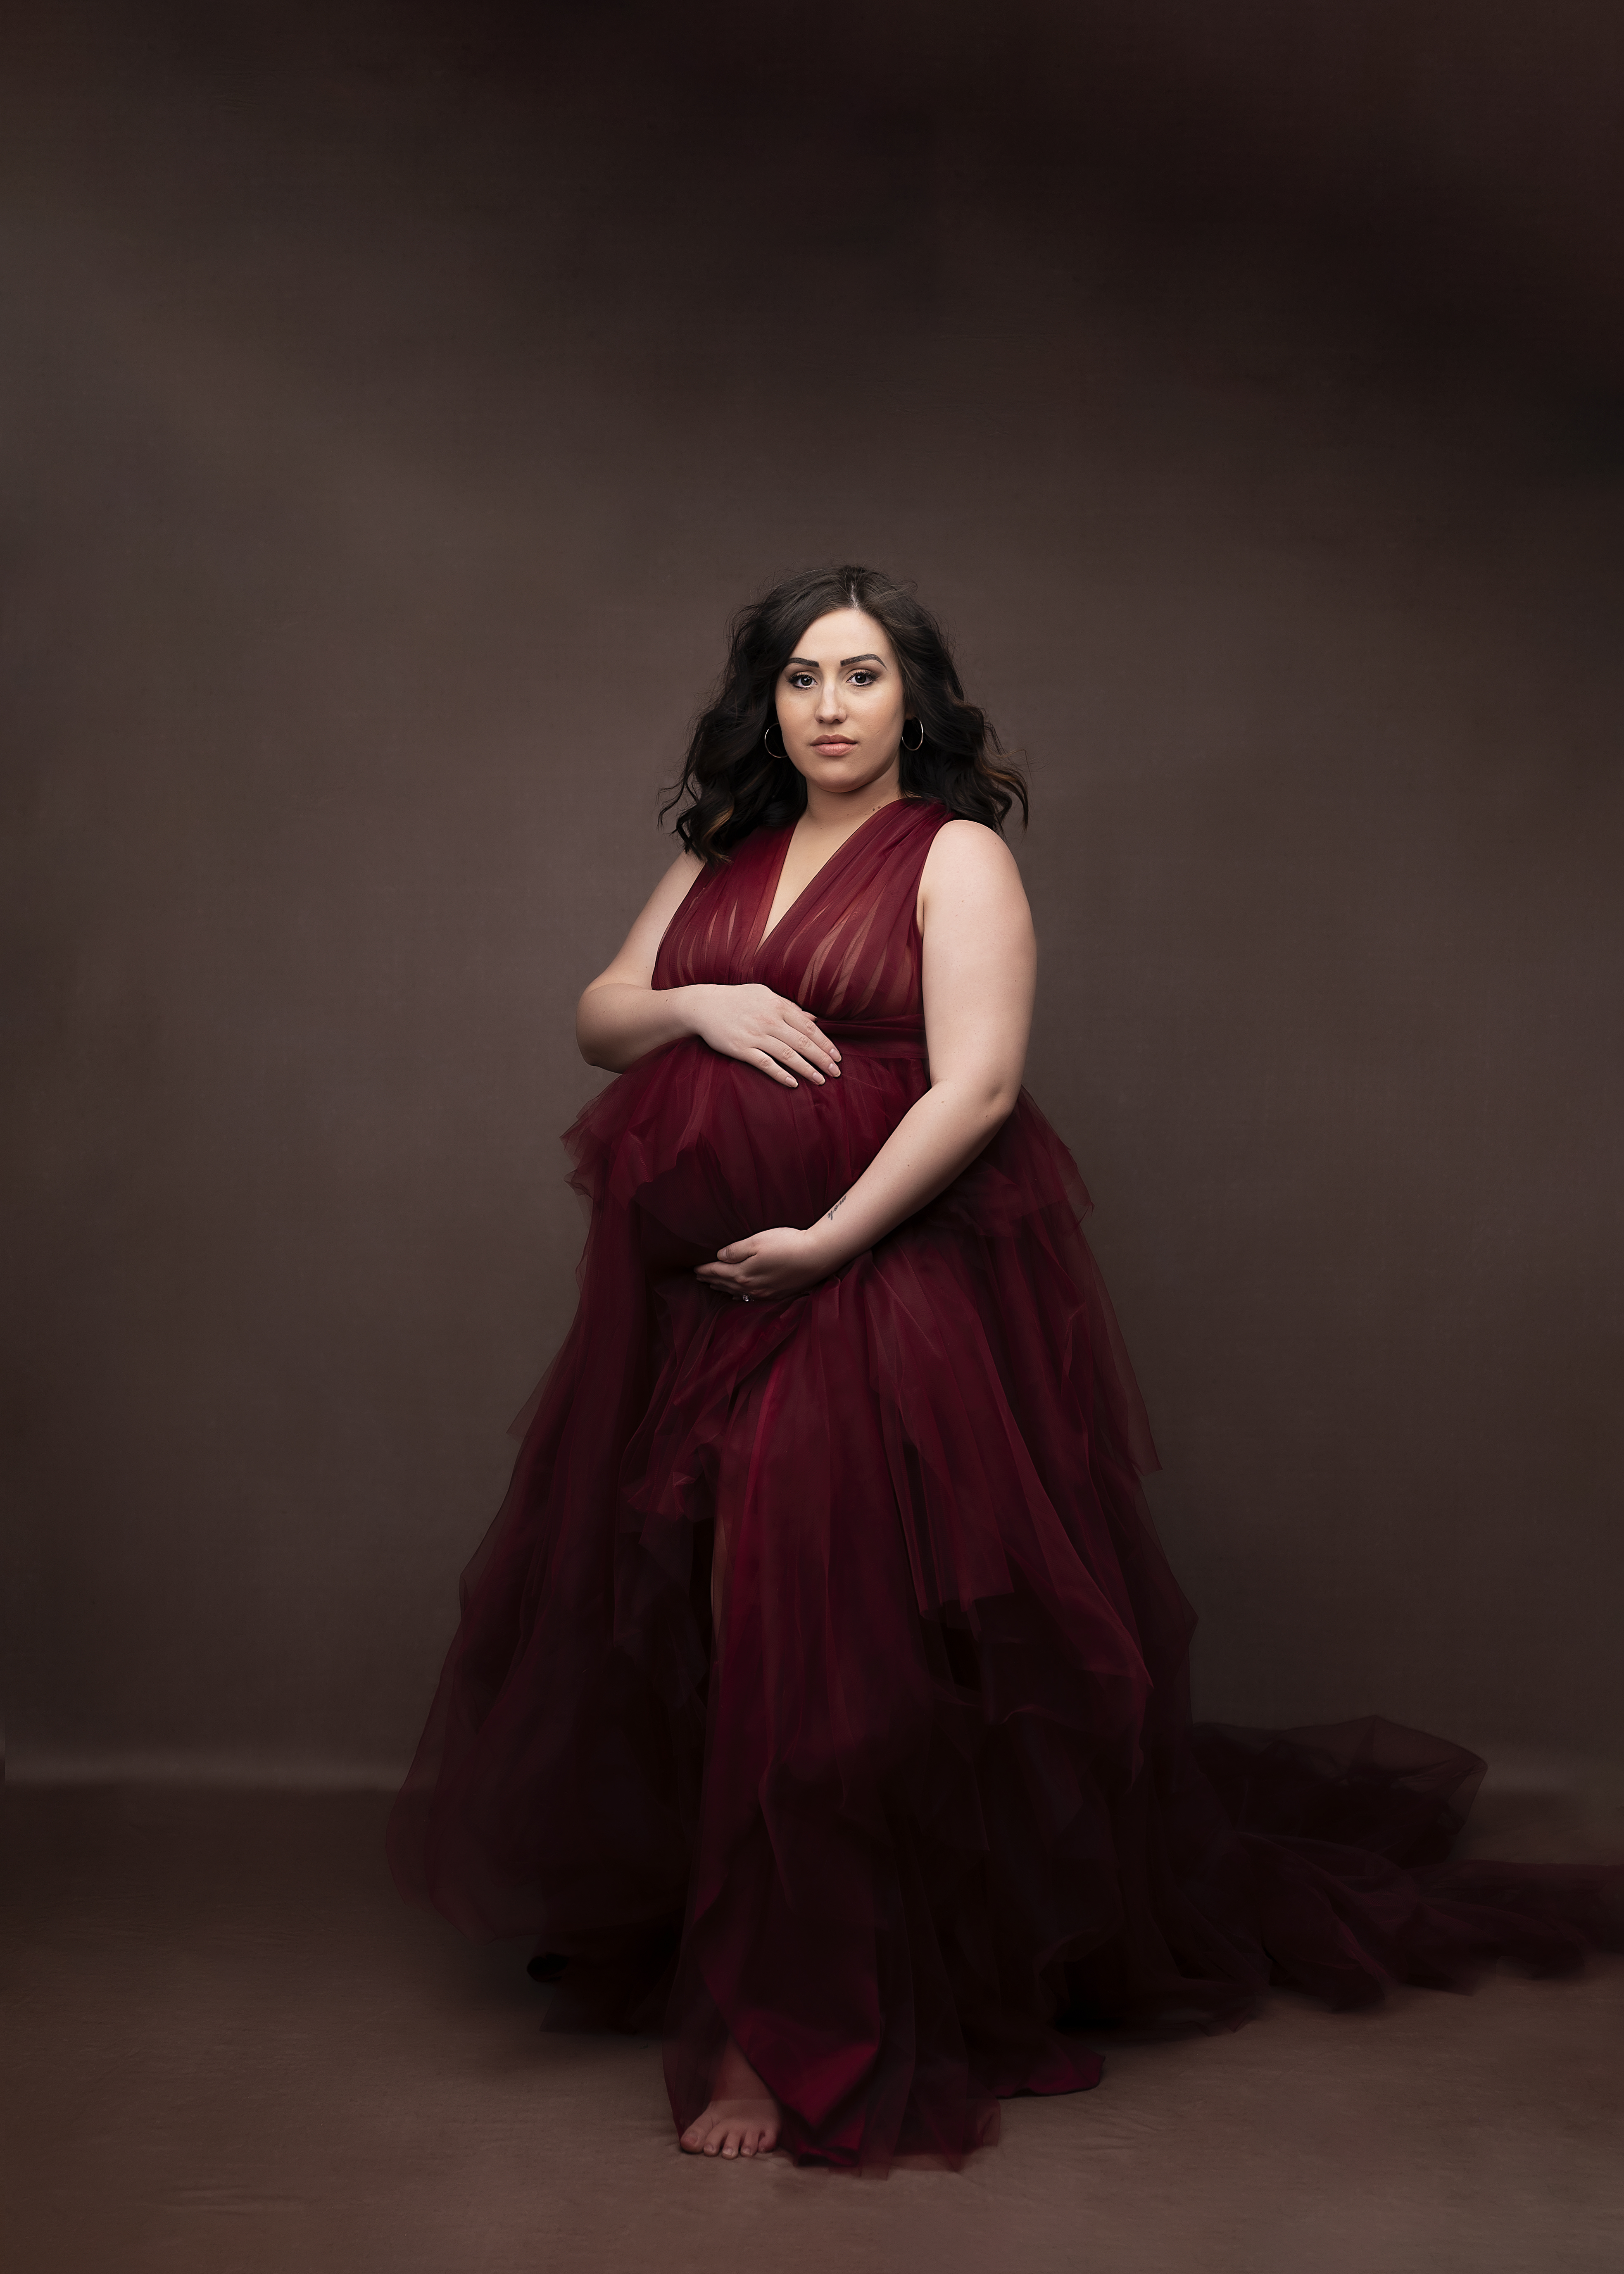 grand rapids maternity photo shoot women in red gown